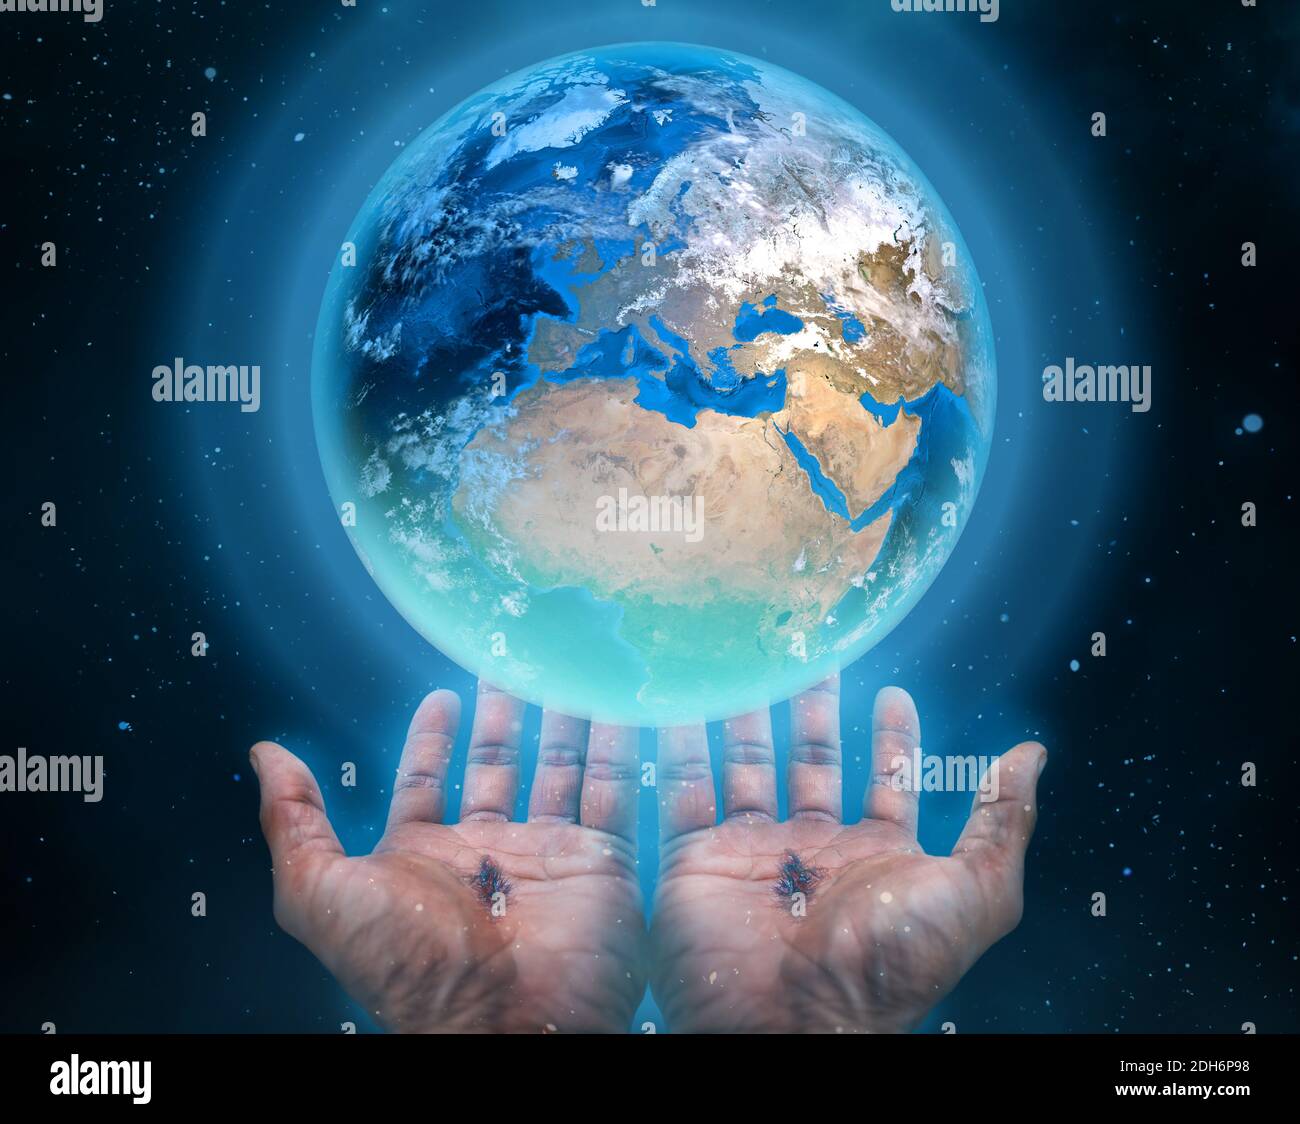 Hands of Jesus holding the earth. Religious theme concept. Stock Photo